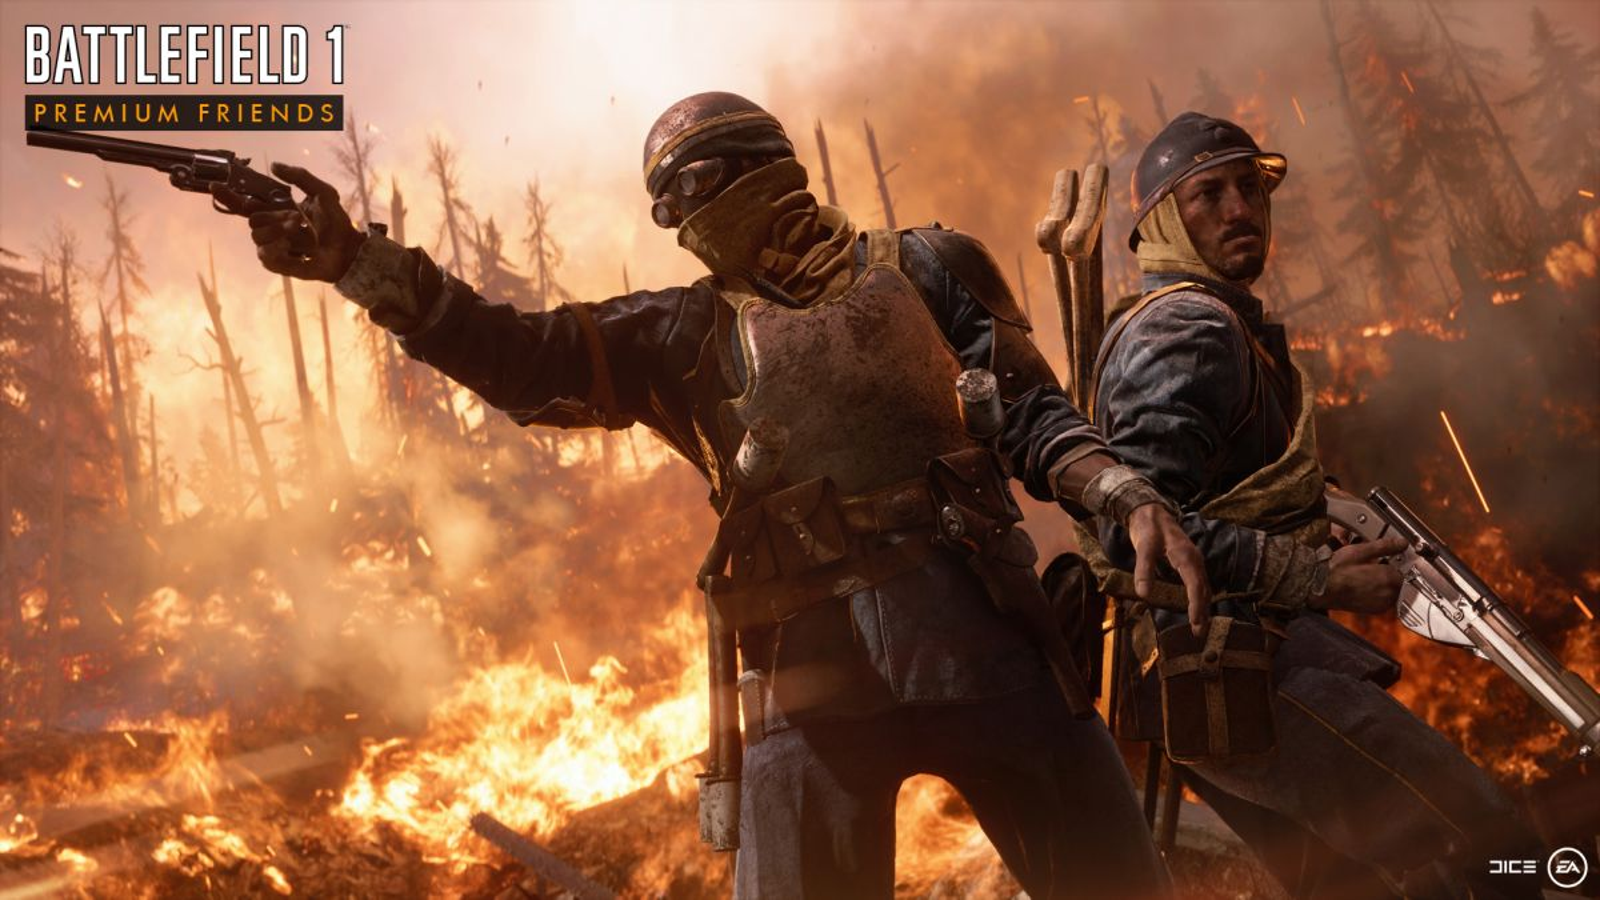 Battlefield 1 Free On Prime Gaming - Battlefield 5 Coming Next